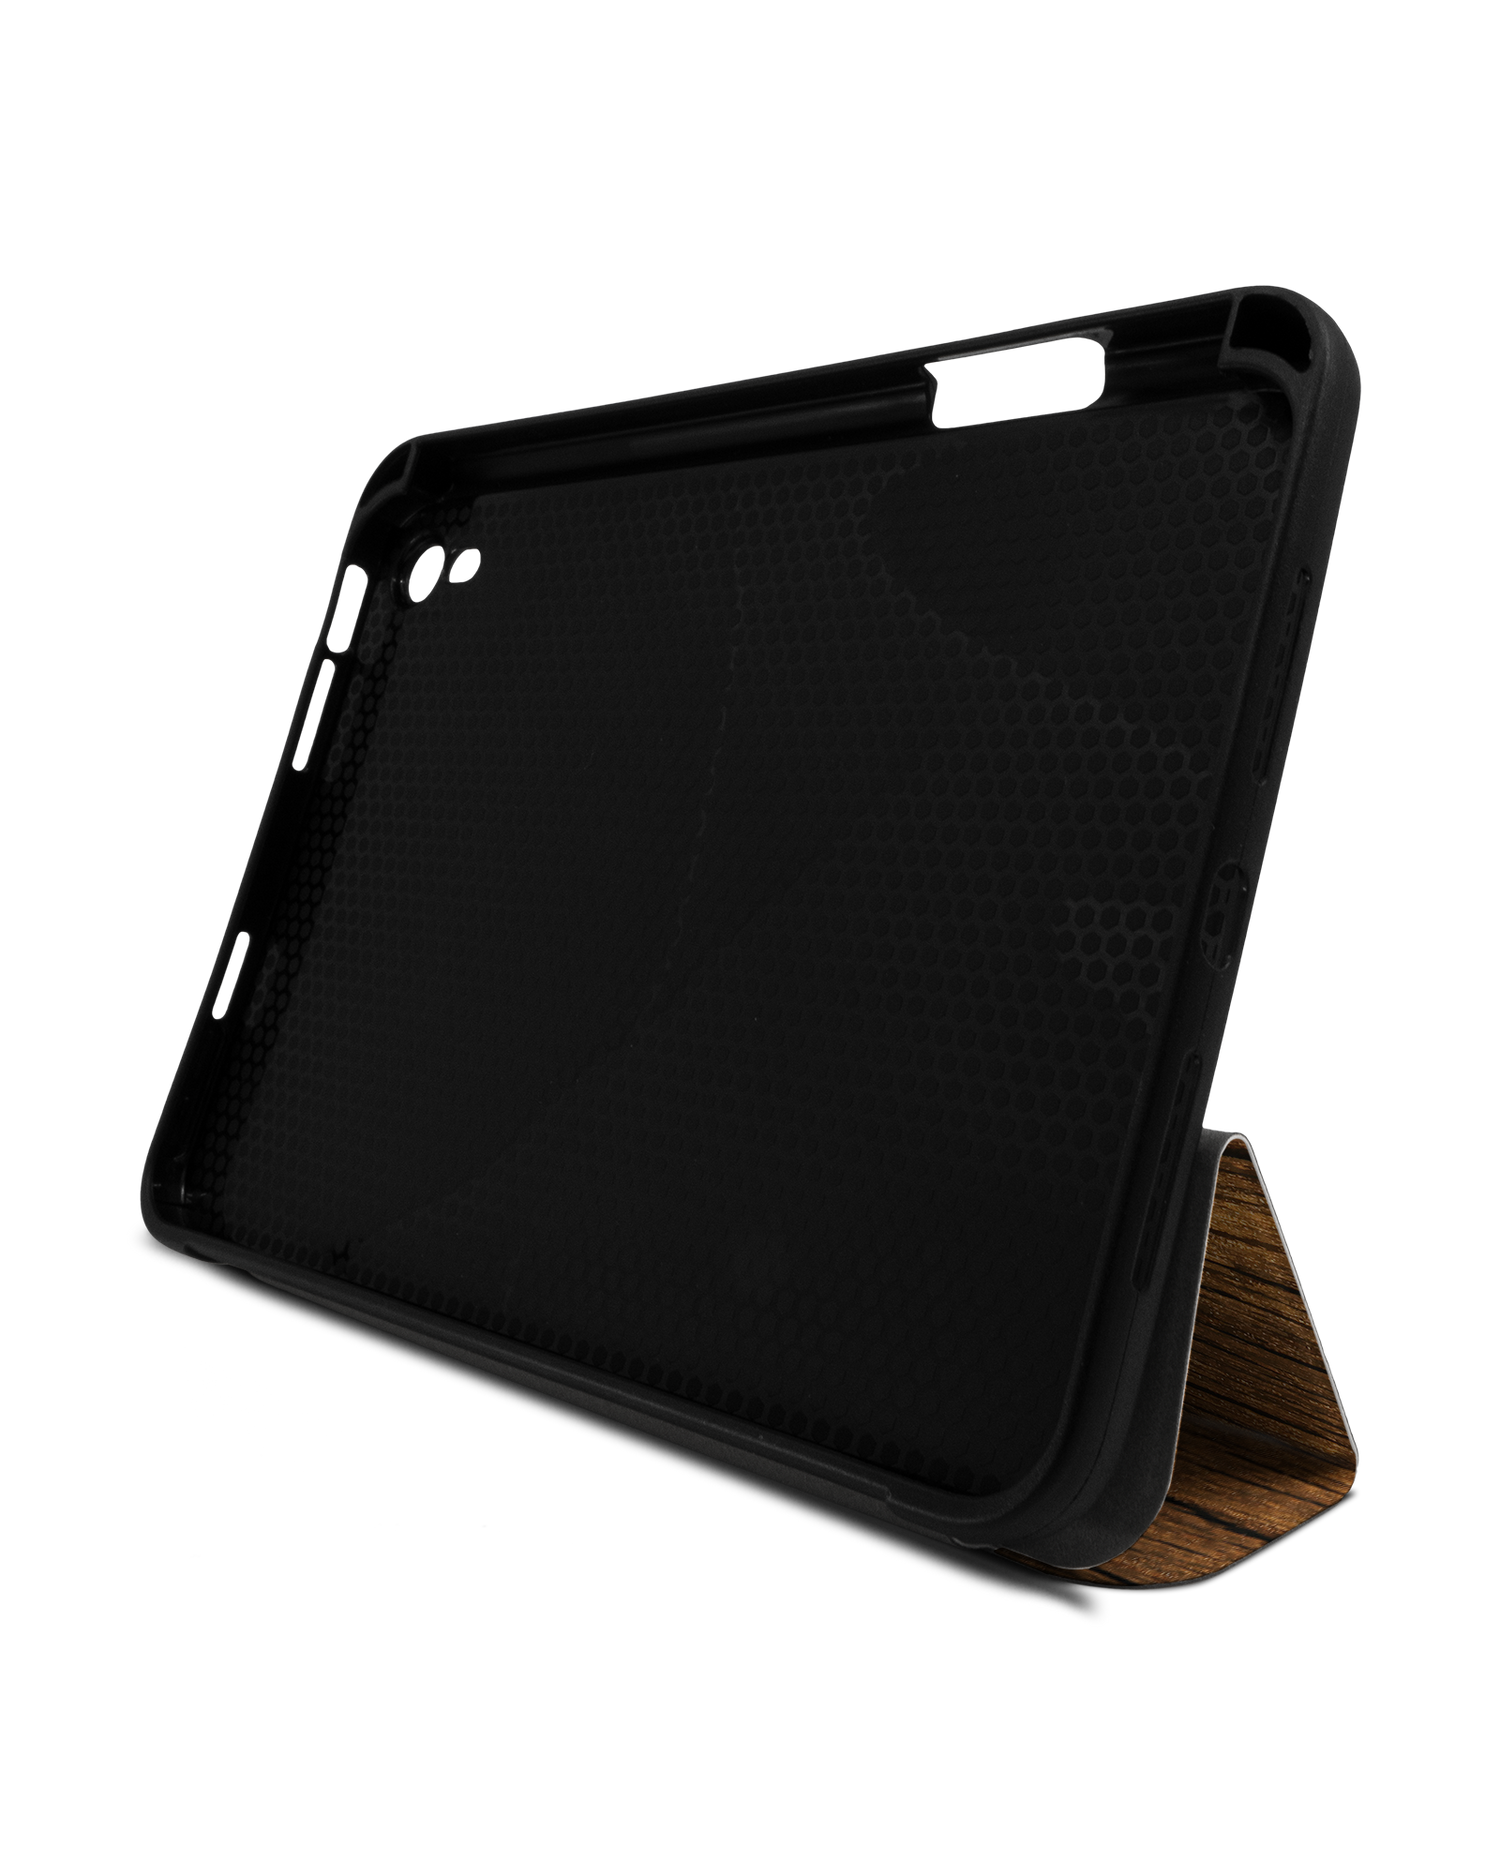 Wood iPad Case with Pencil Holder Apple iPad mini 6 (2021): Set up in landscape format (front view)